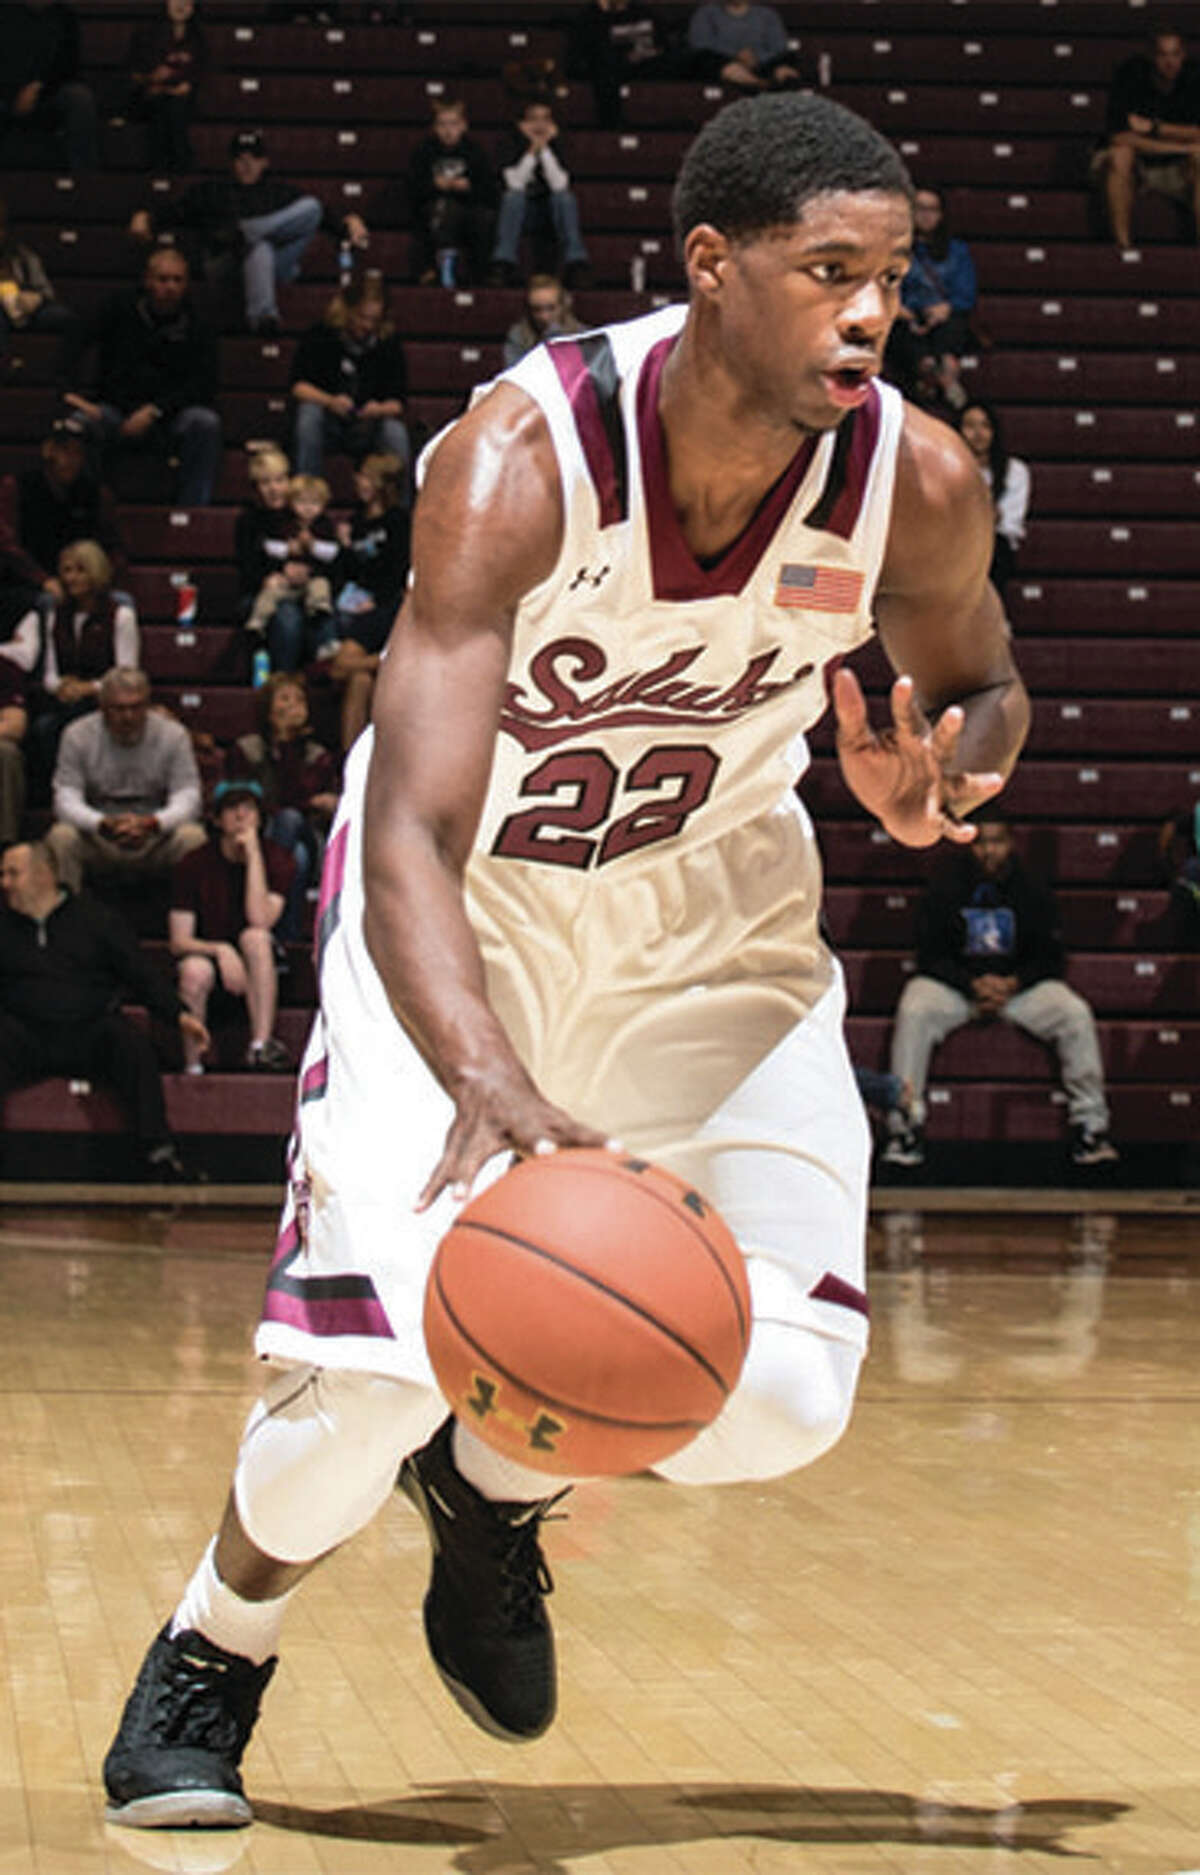 SIU’s Armon Fletcher, a redshirt freshman from Edwardsville, finished with 10 points and seven rebounds in Wednesday’s loss to SIUE in Carbondale.